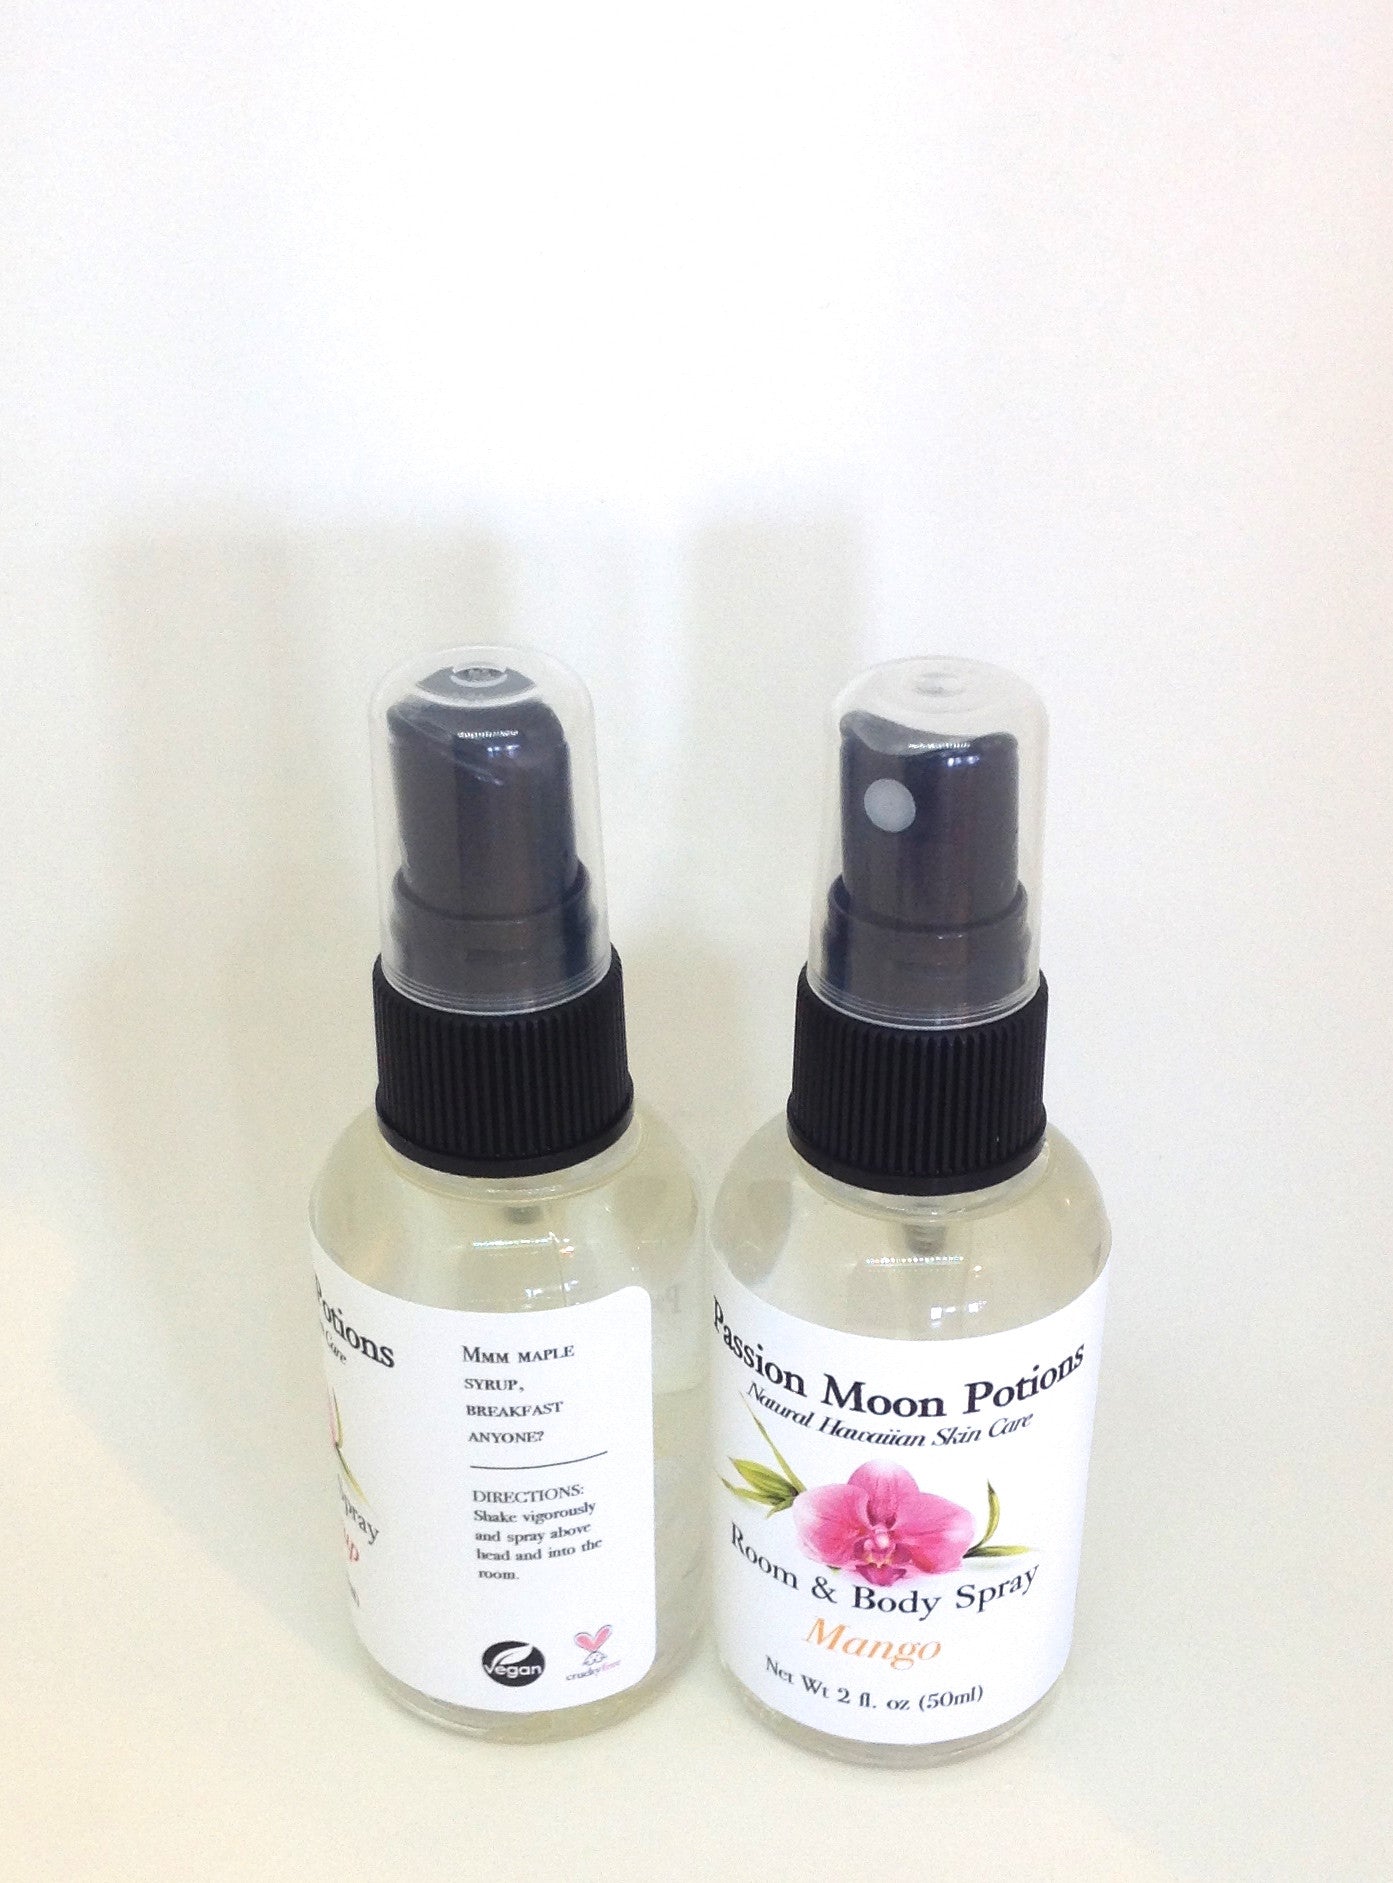 Room and Body Sprays - Passion Moon Potions - 6